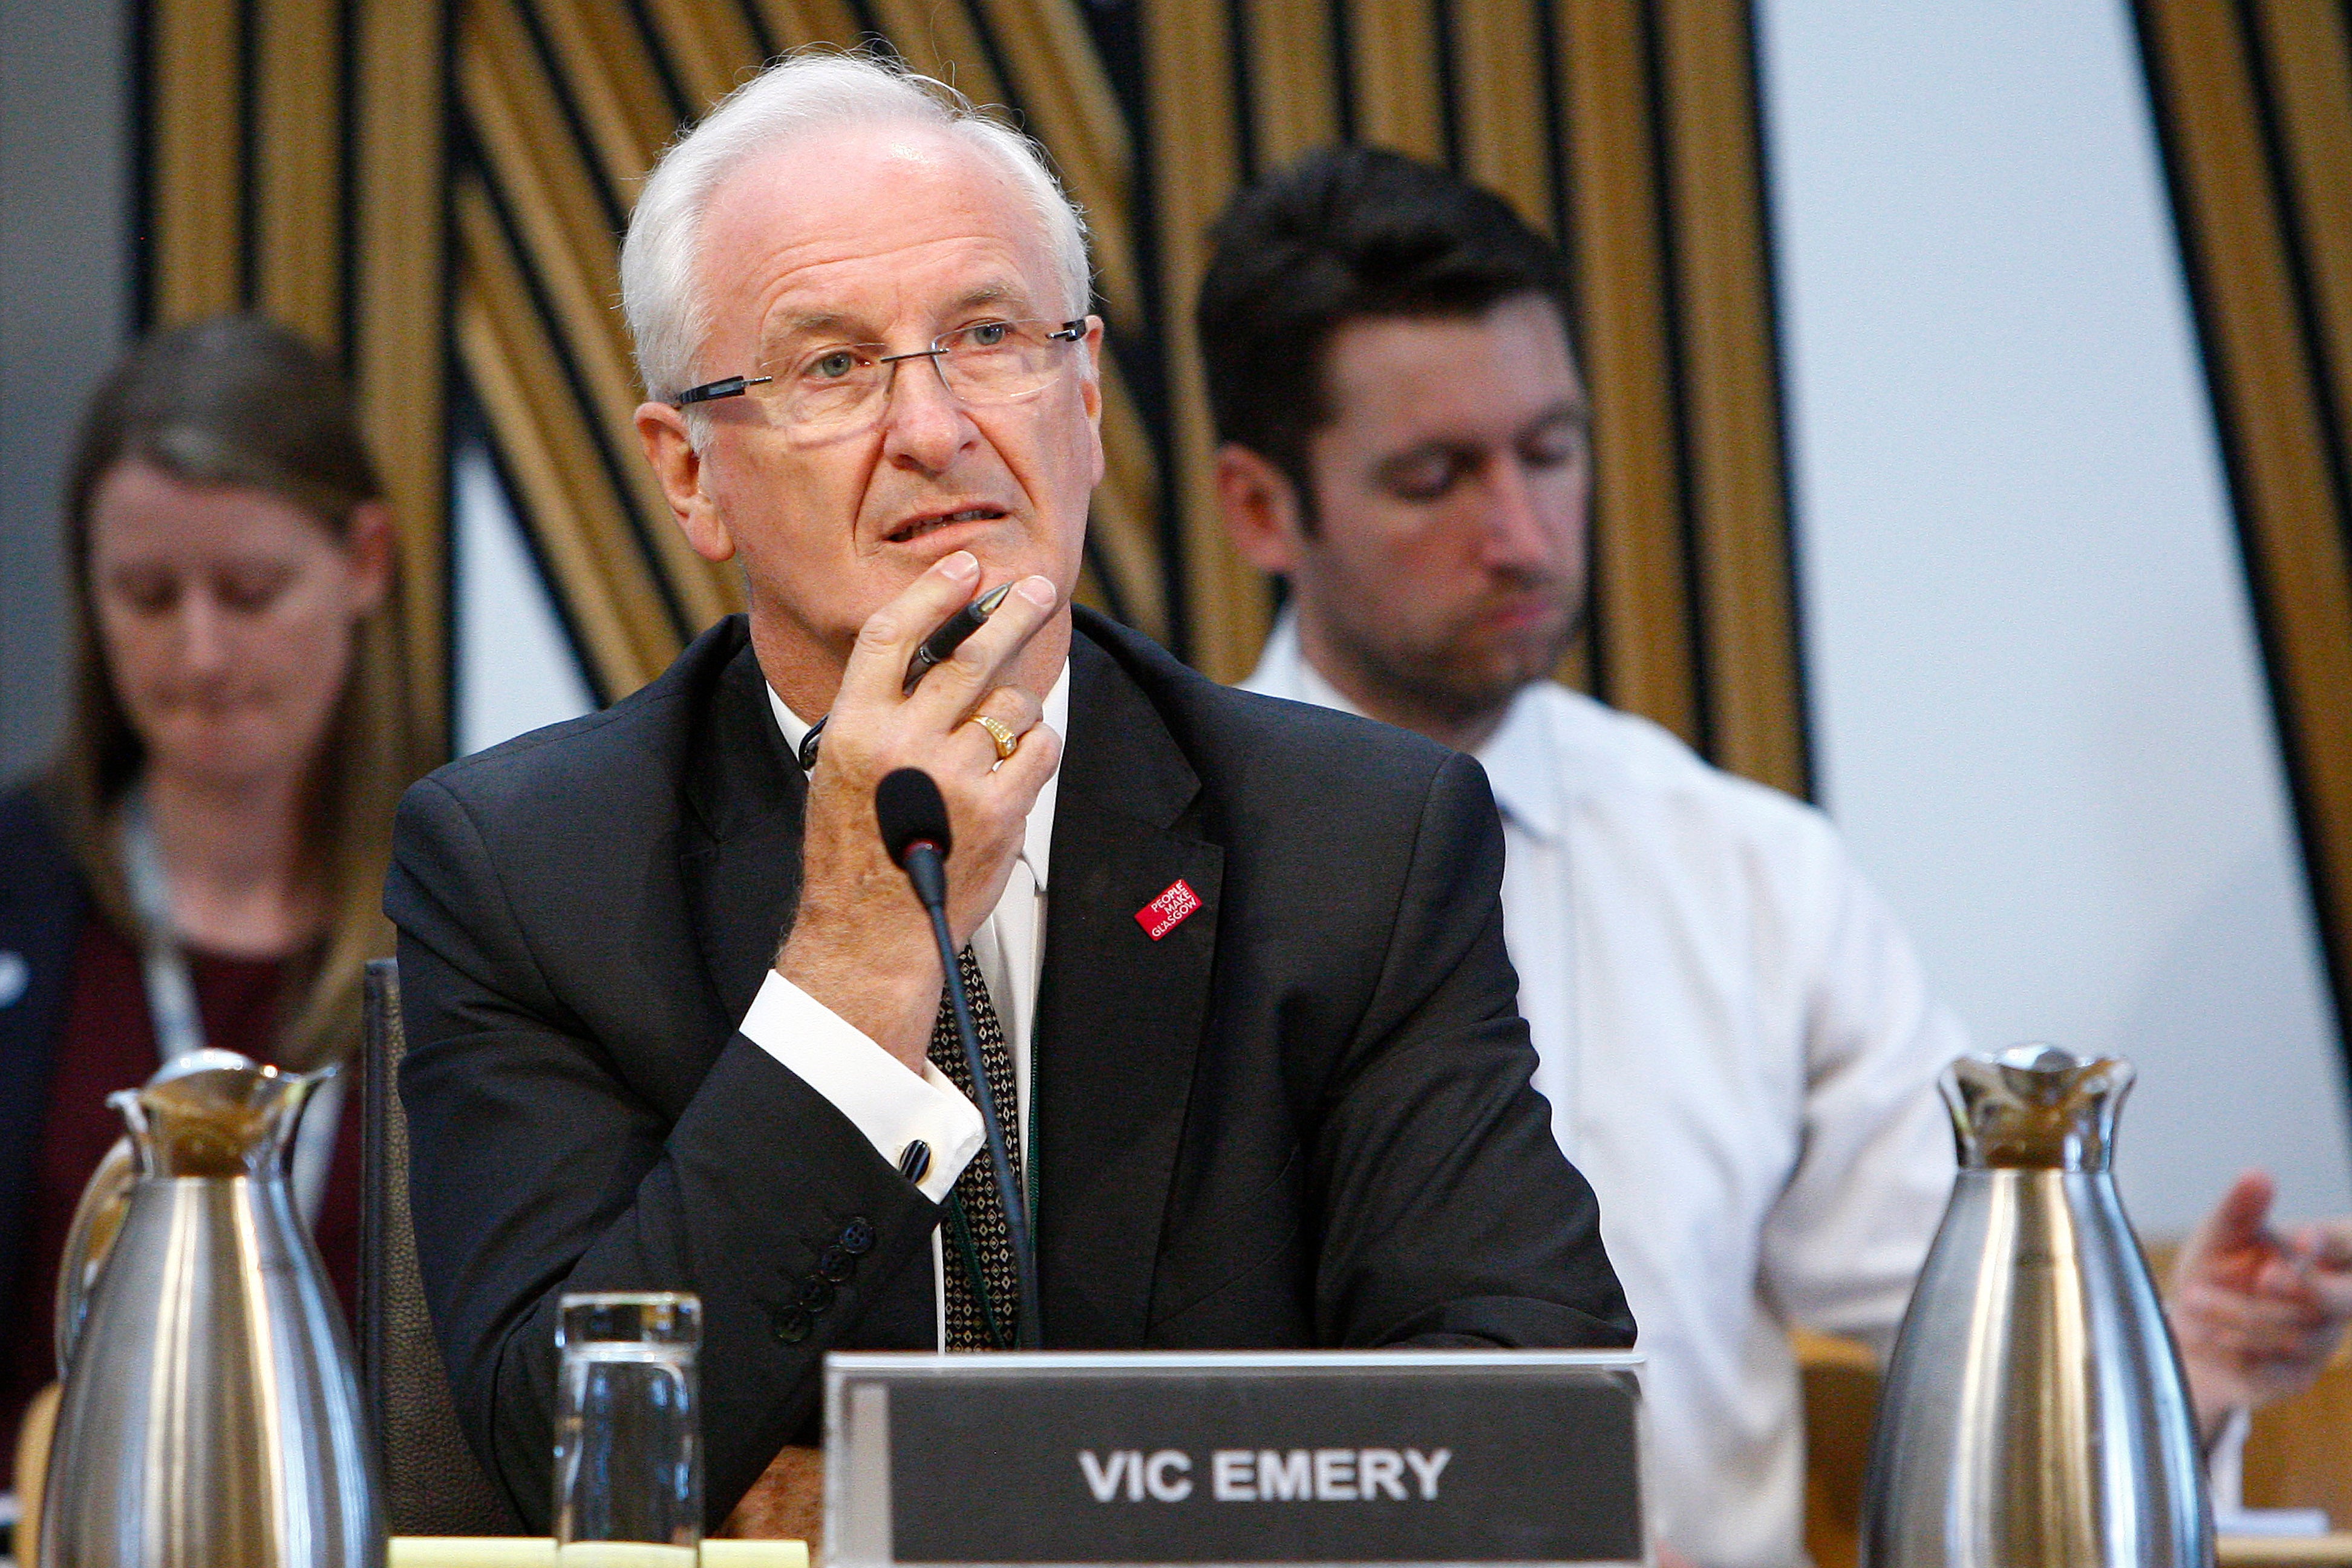 Vic Emery, former chairman of Scottish Police Authority, died at the weekend (Andrew Cowan/PA)